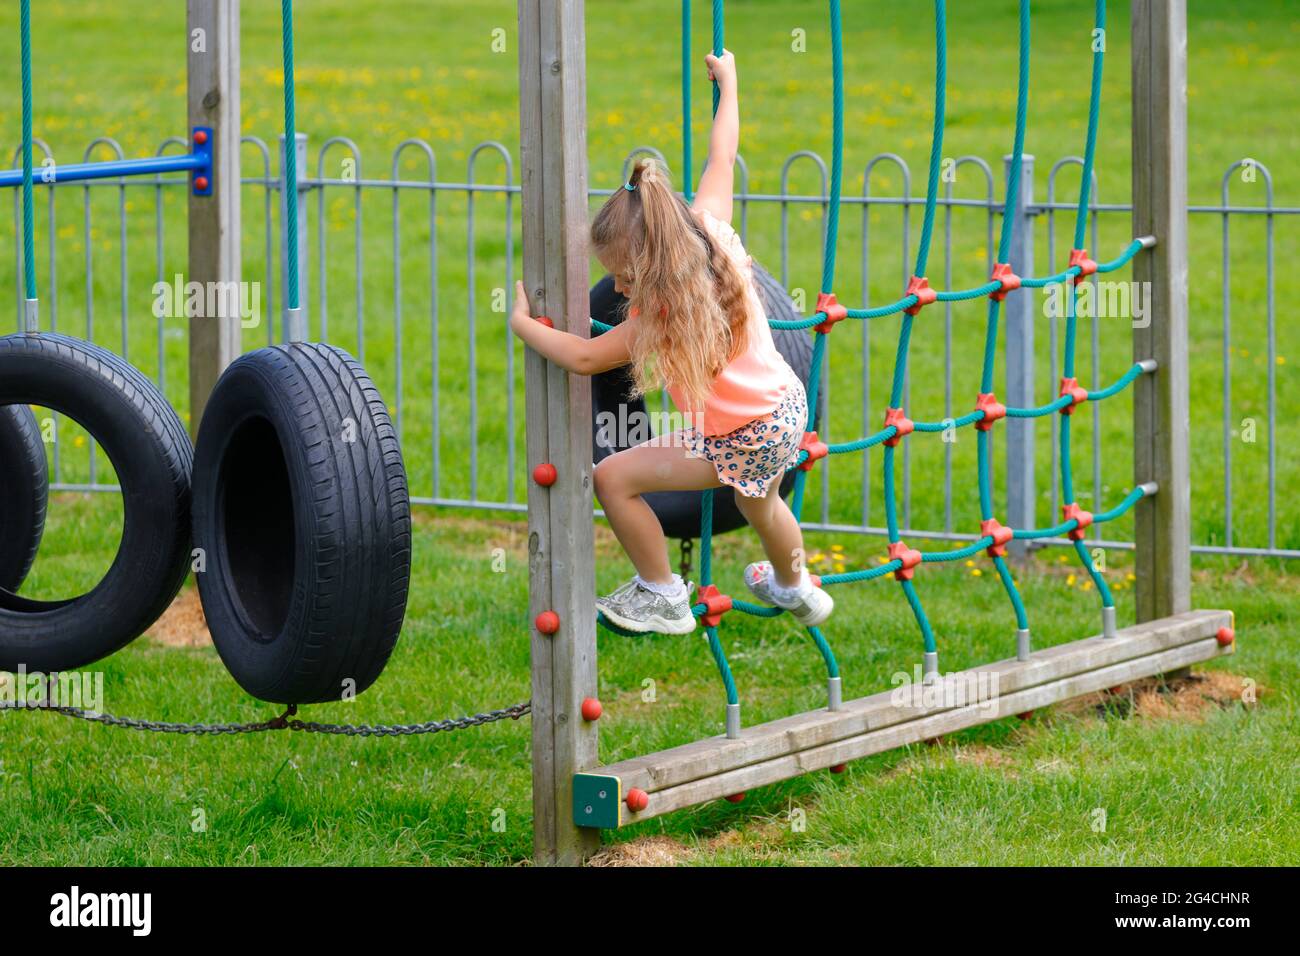 A 5 year old girl climbs across tyres on a play park in Flamborough,East Yorkshire,UK Stock Photo